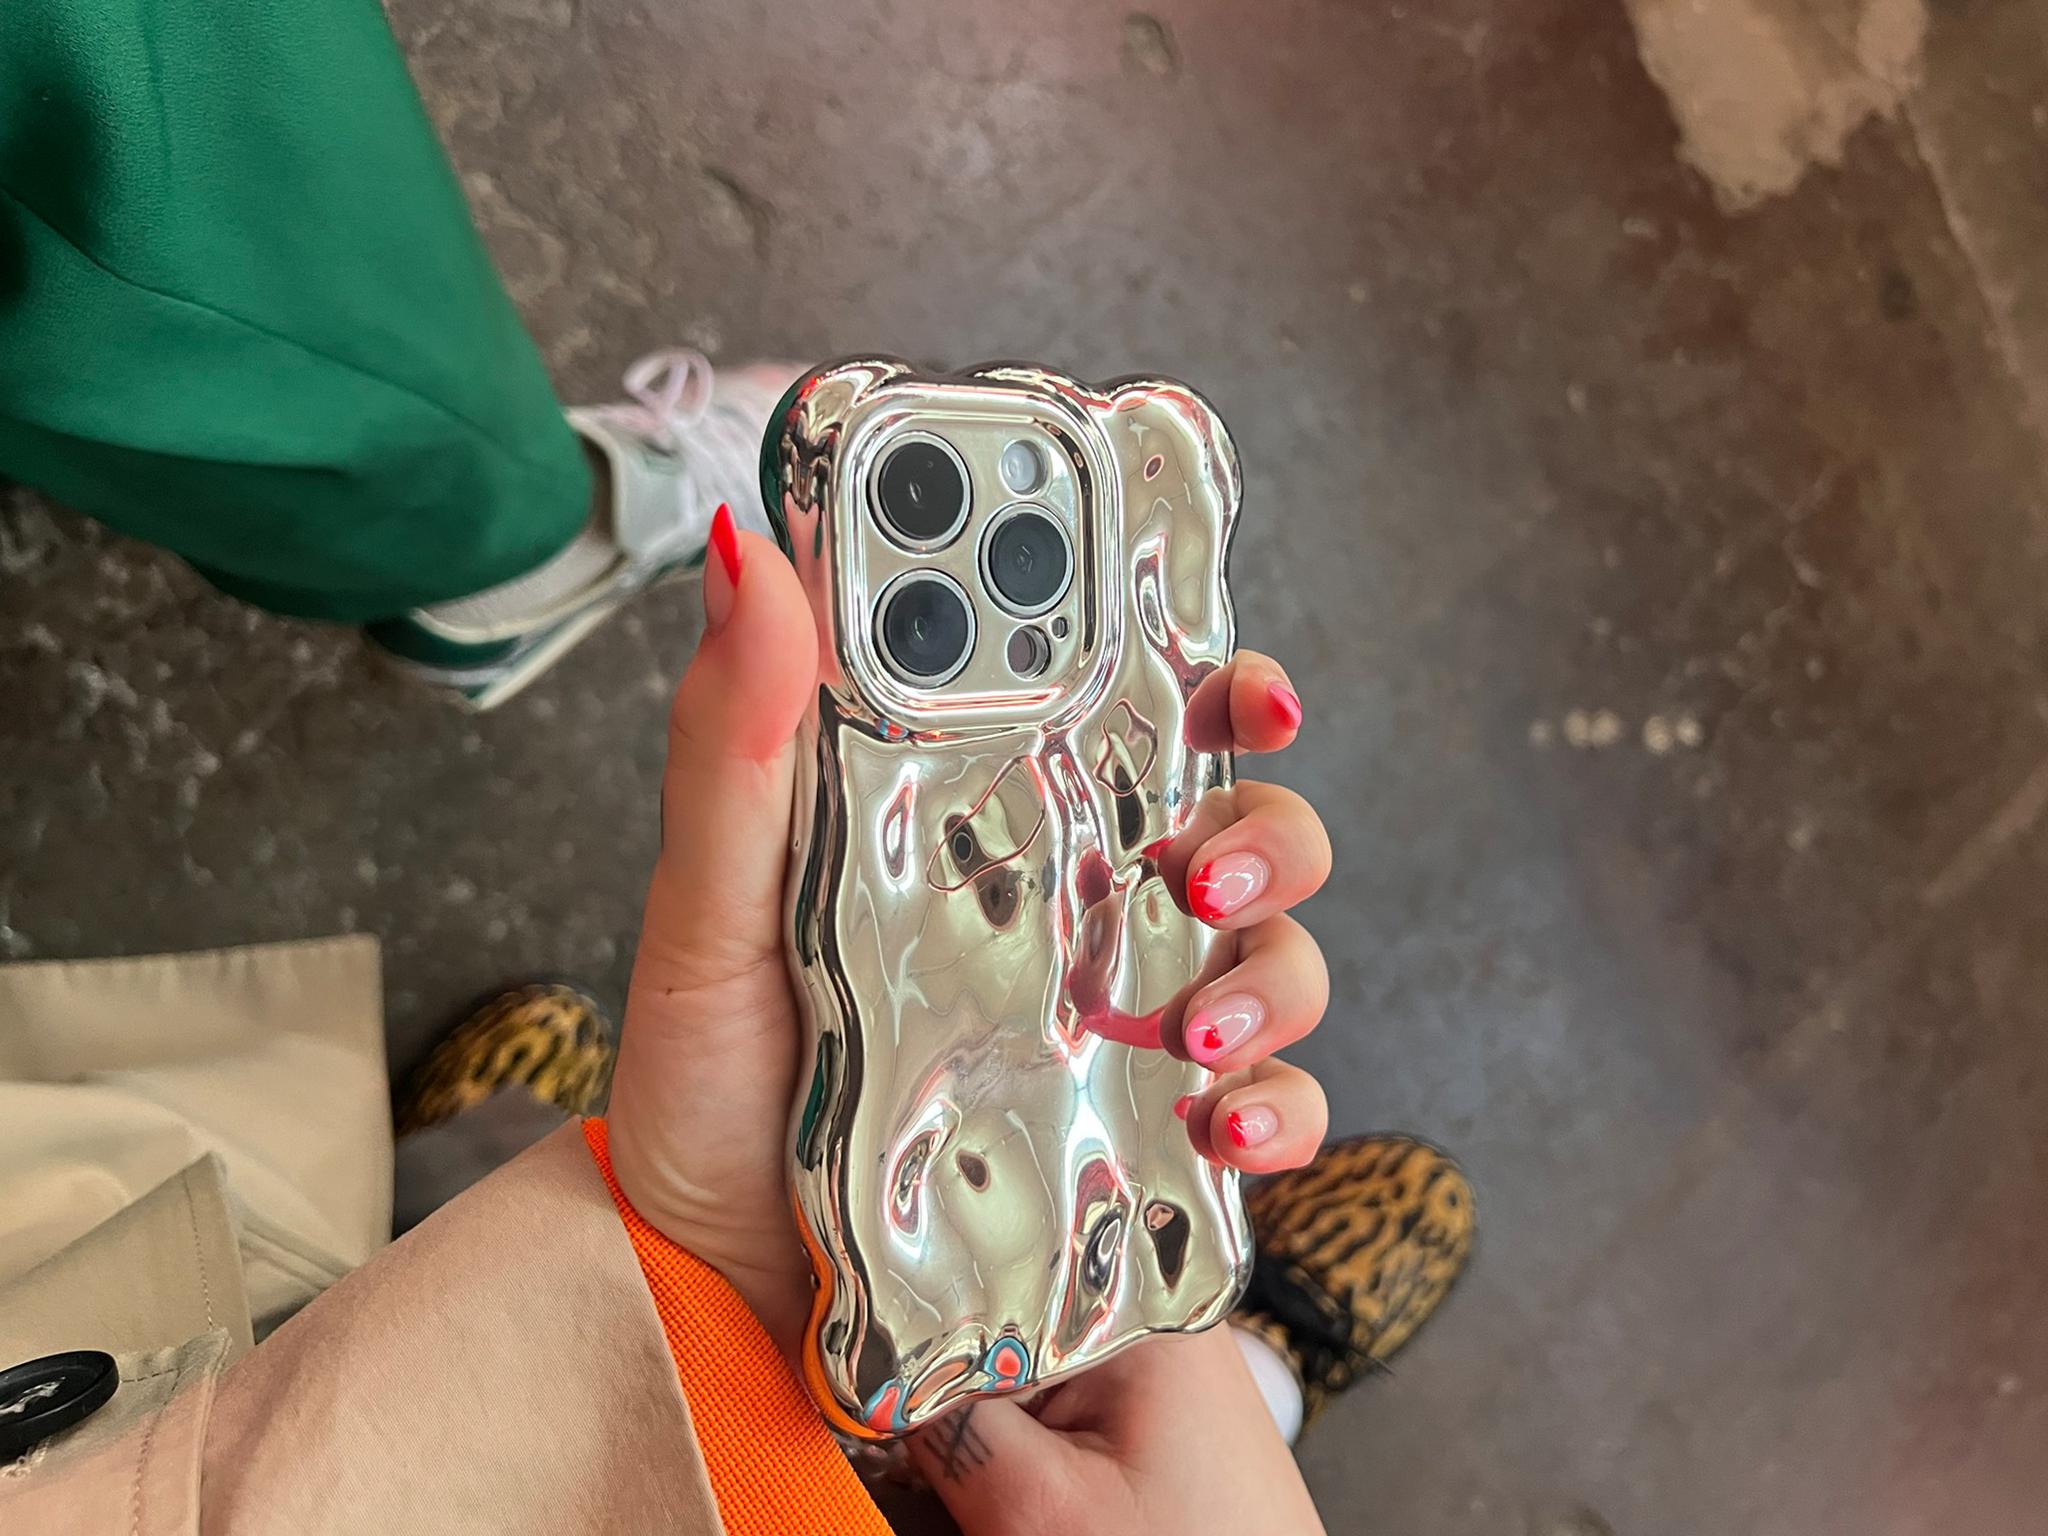 I managed to snap a pic of the iPhone case